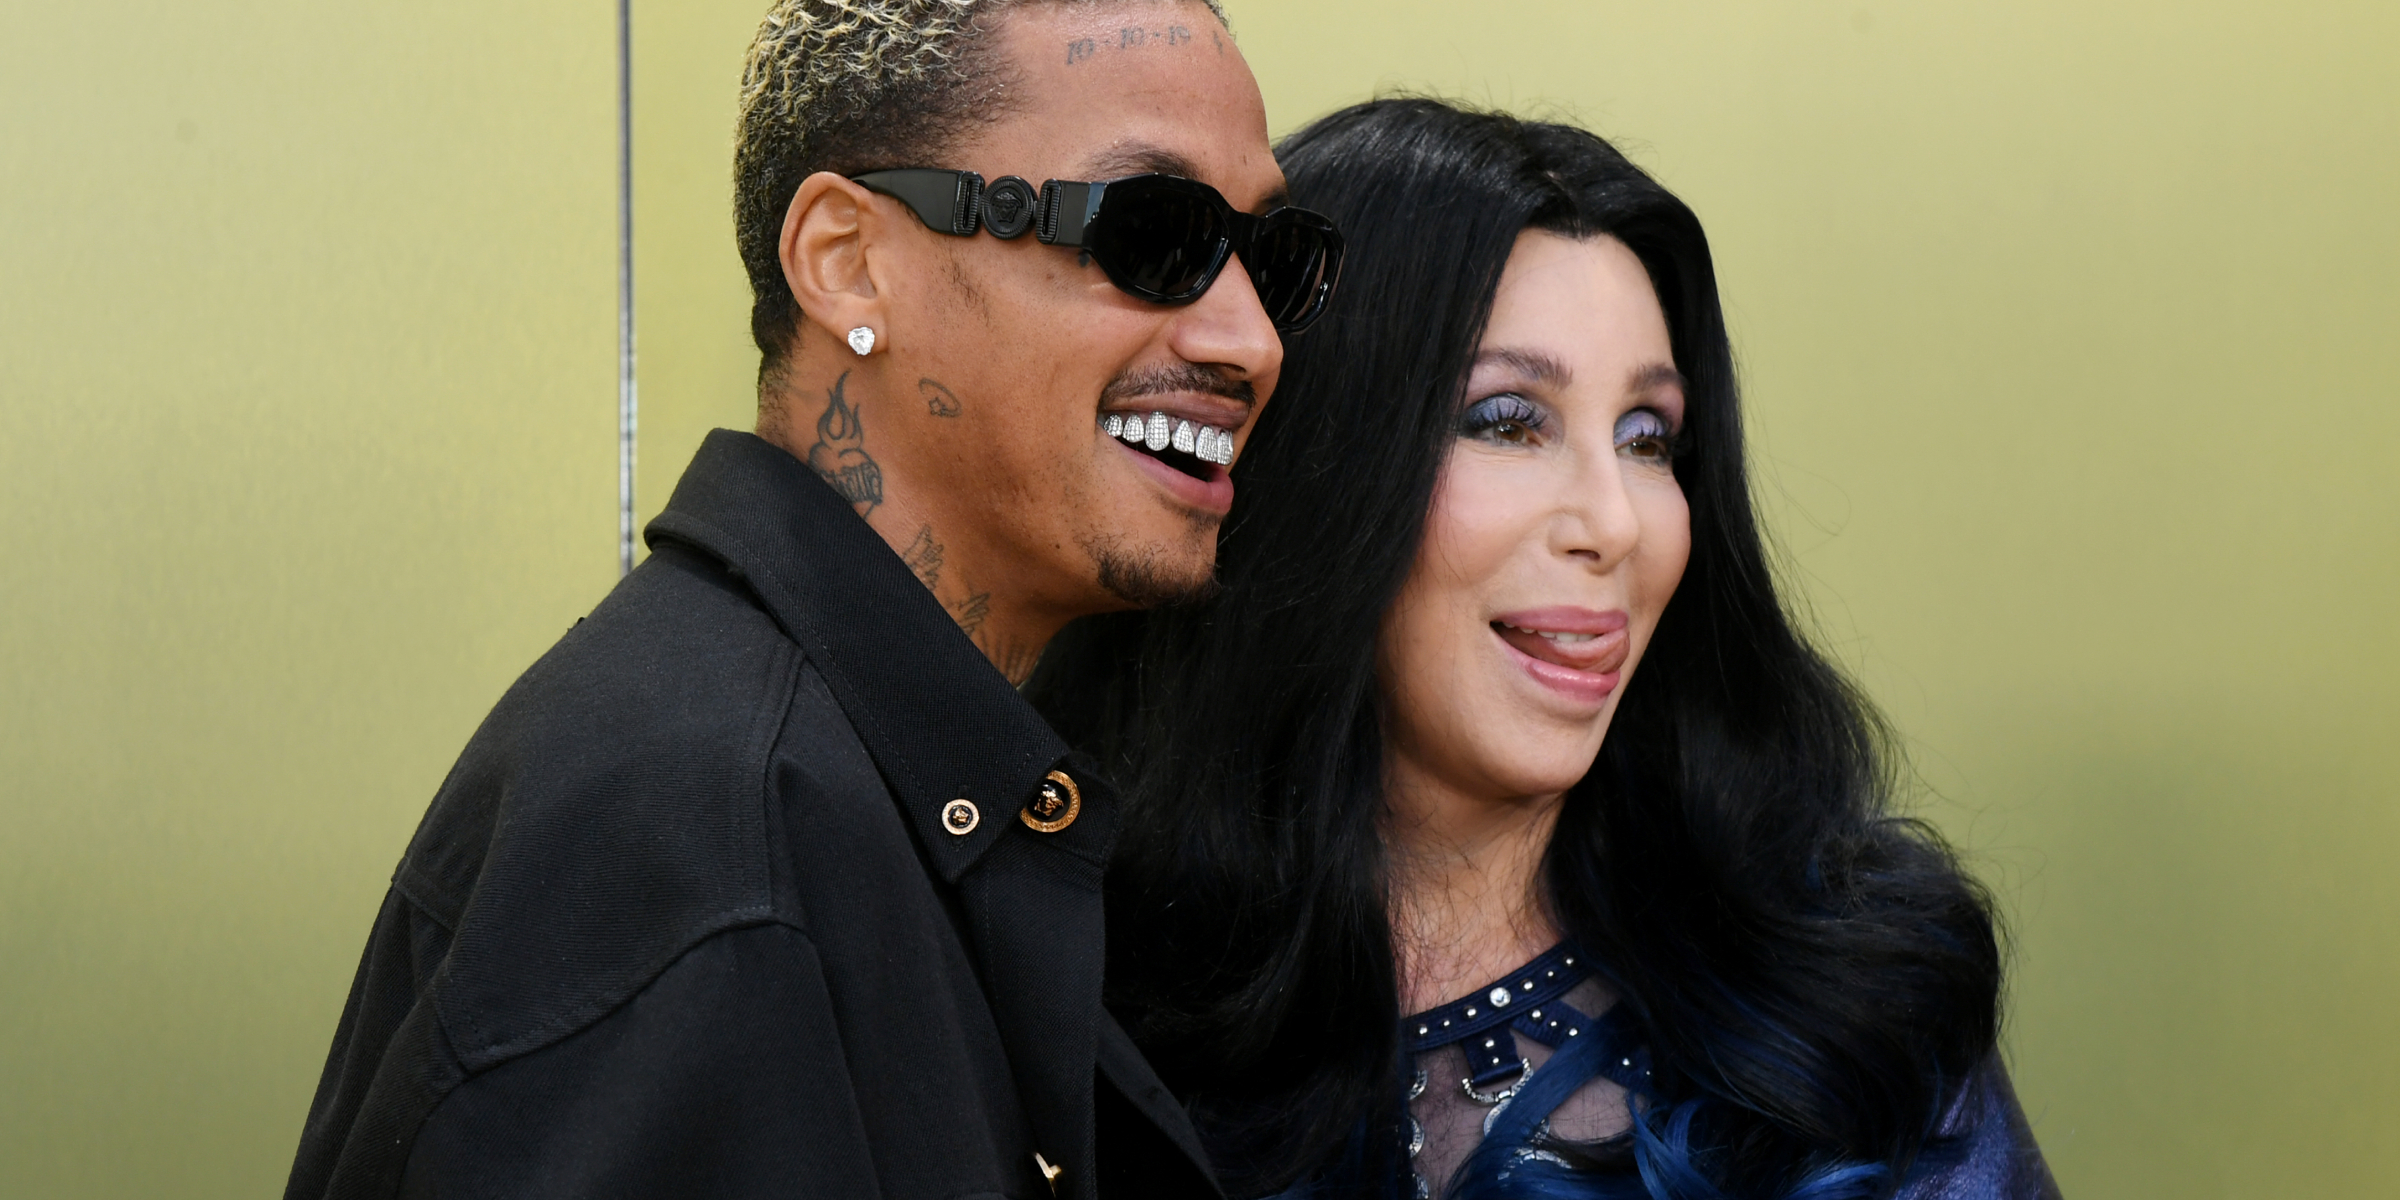 Alexander Edwards and Cher | Source: Getty Images